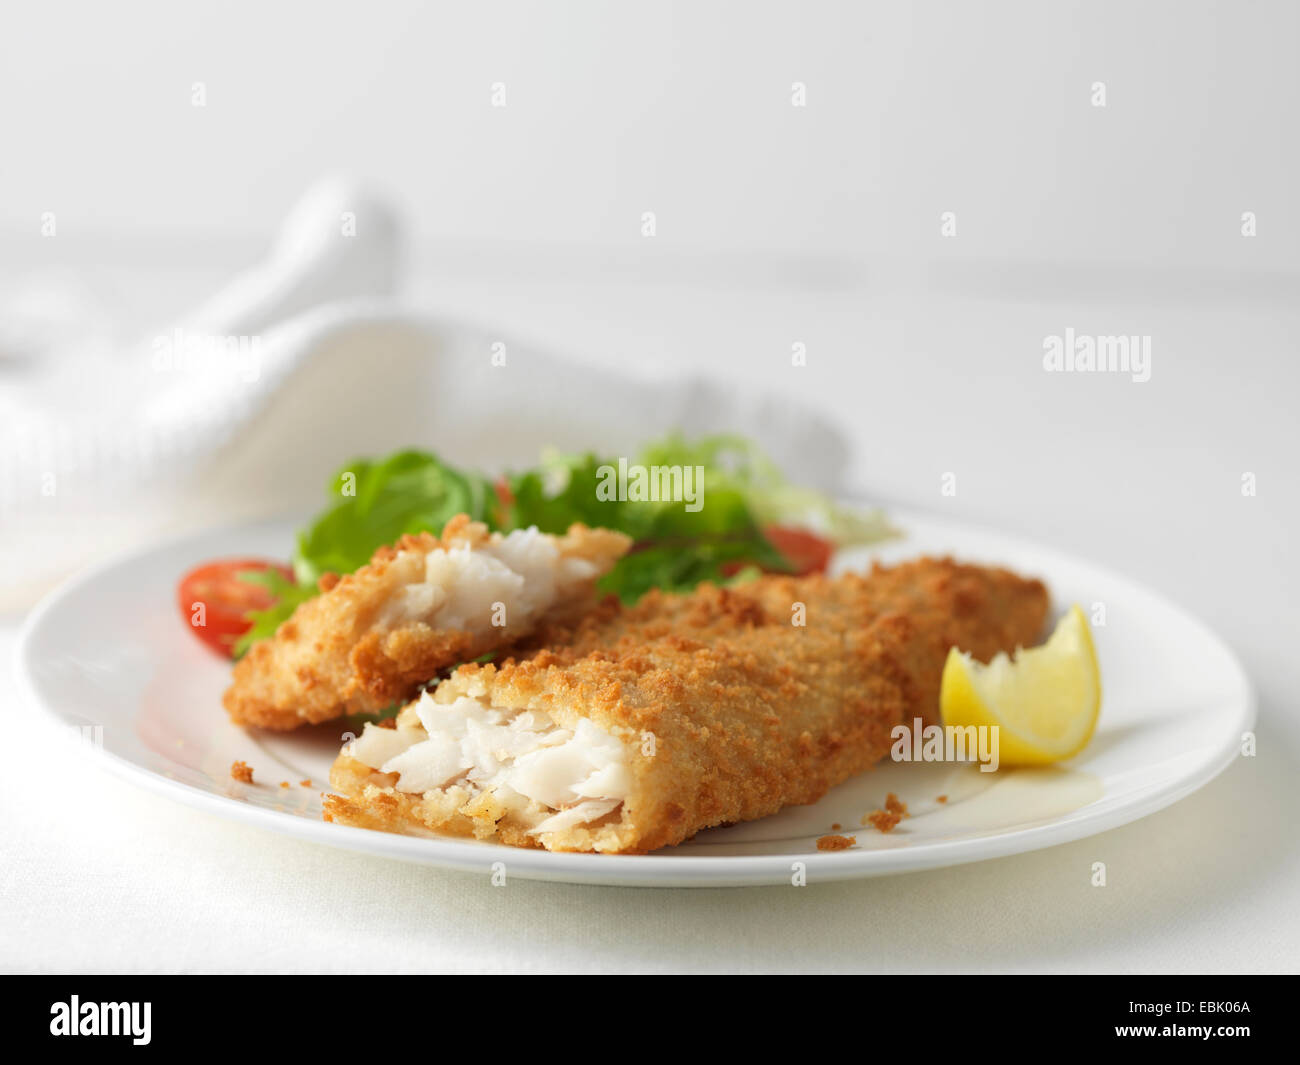 Plate of battered cod with green salad, cherry tomatoes and lemon slice Stock Photo